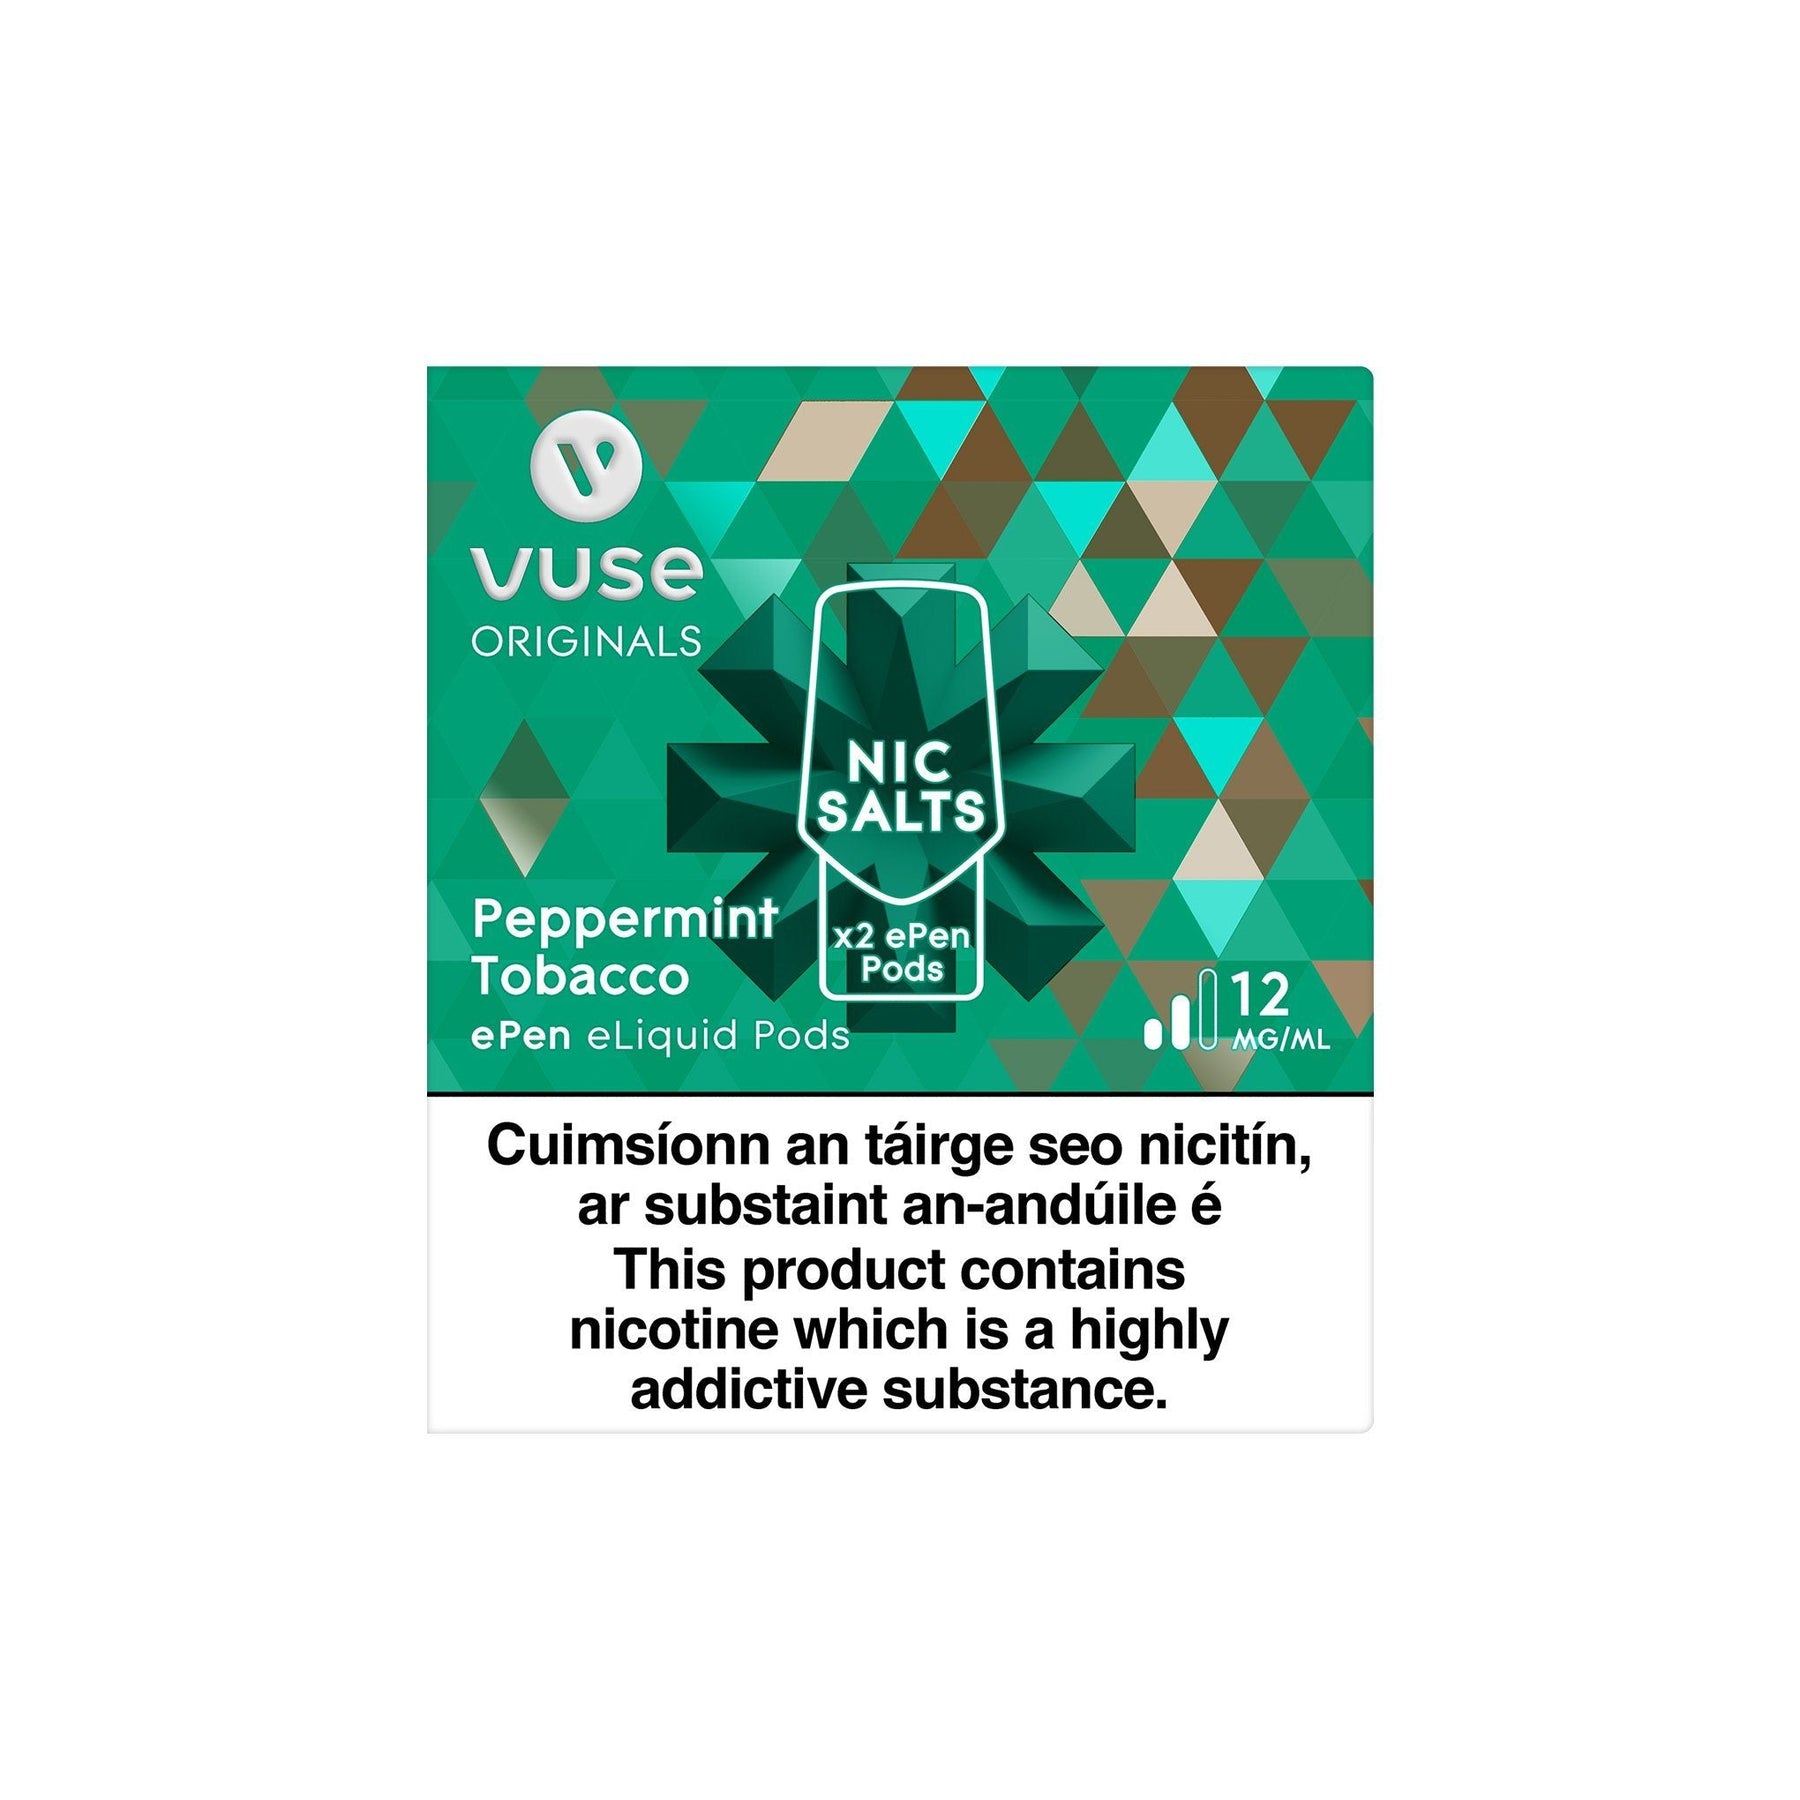 VUSE ePen 3 Cartridges Peppermint Tobacco 12MG vPro - Medium Nicotine 